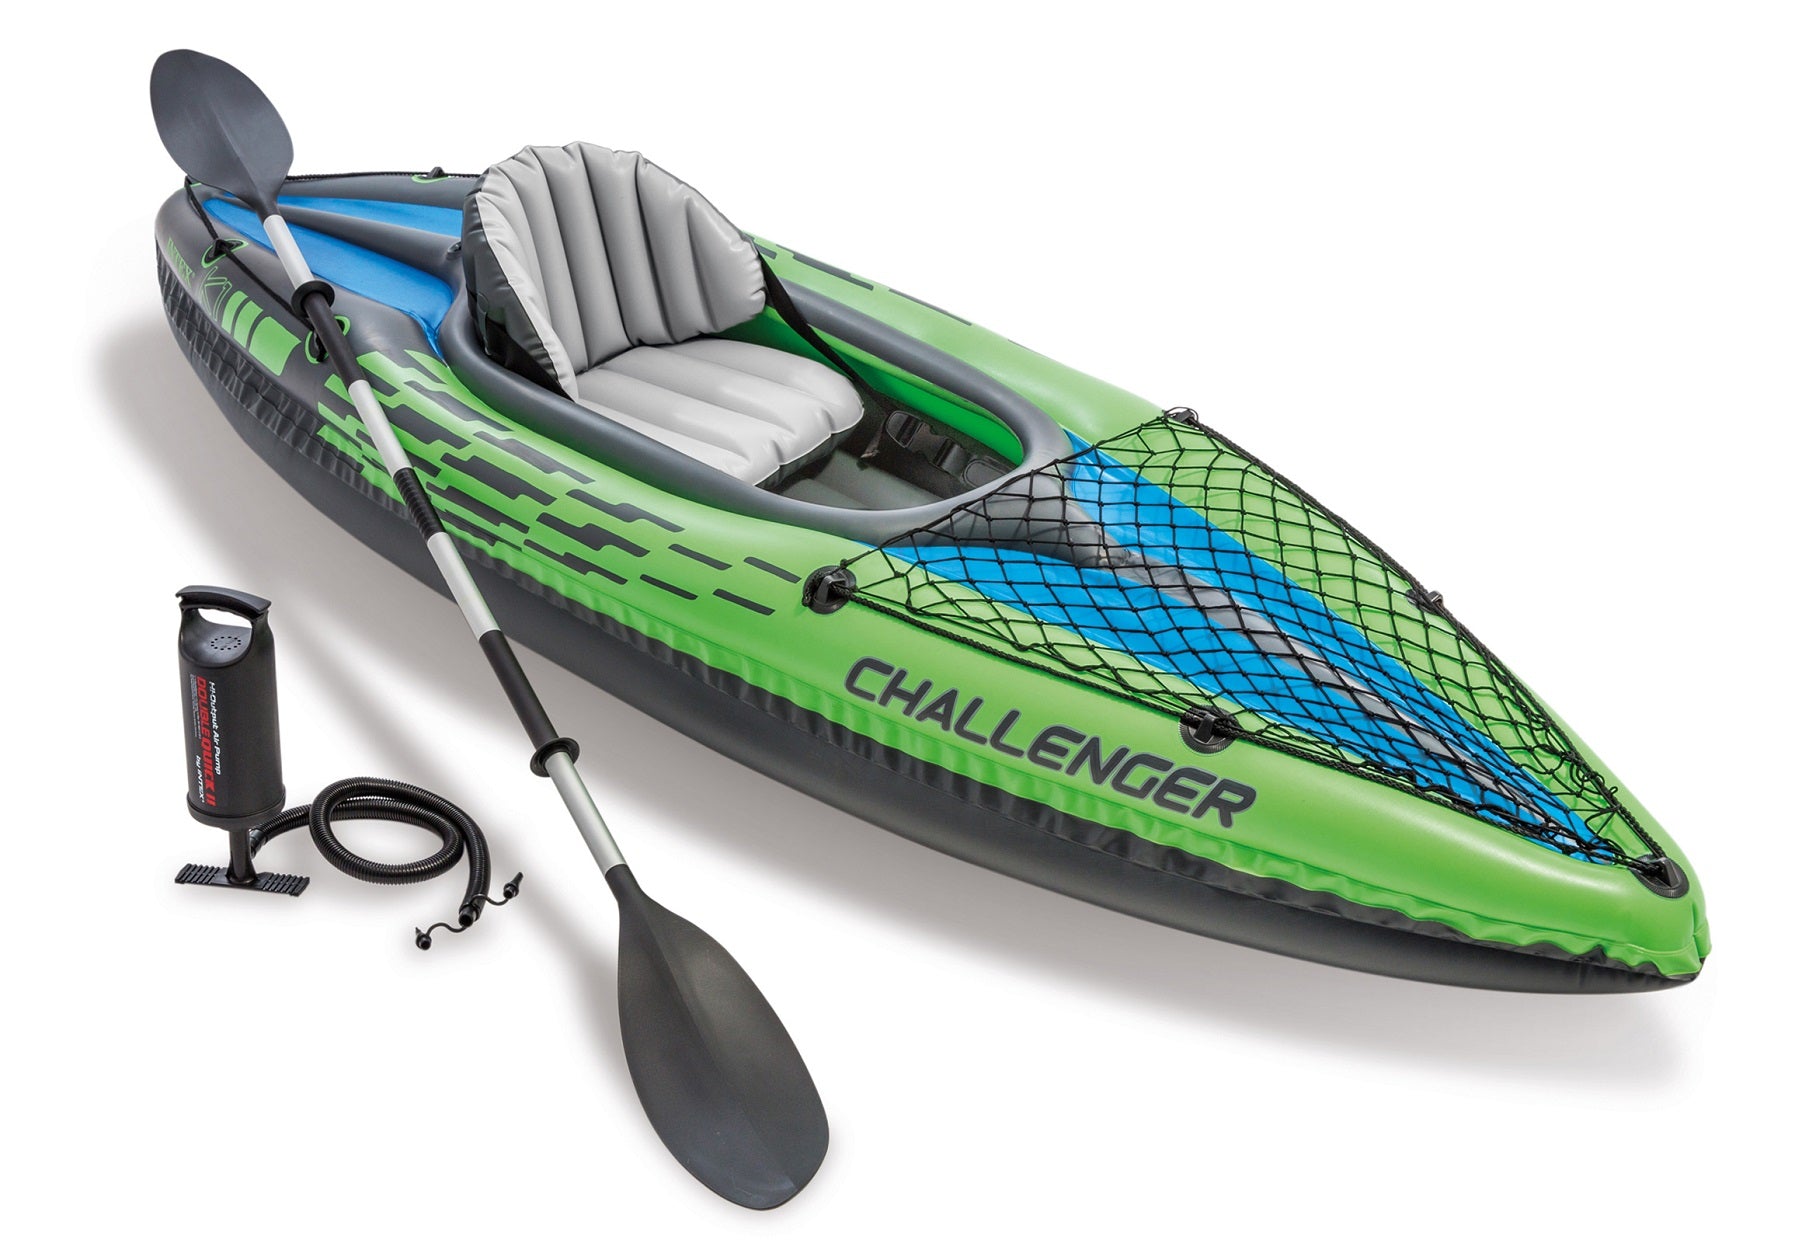 Intex Challenger K1 Inflatable Kayak 1 Person with Oars and Pump